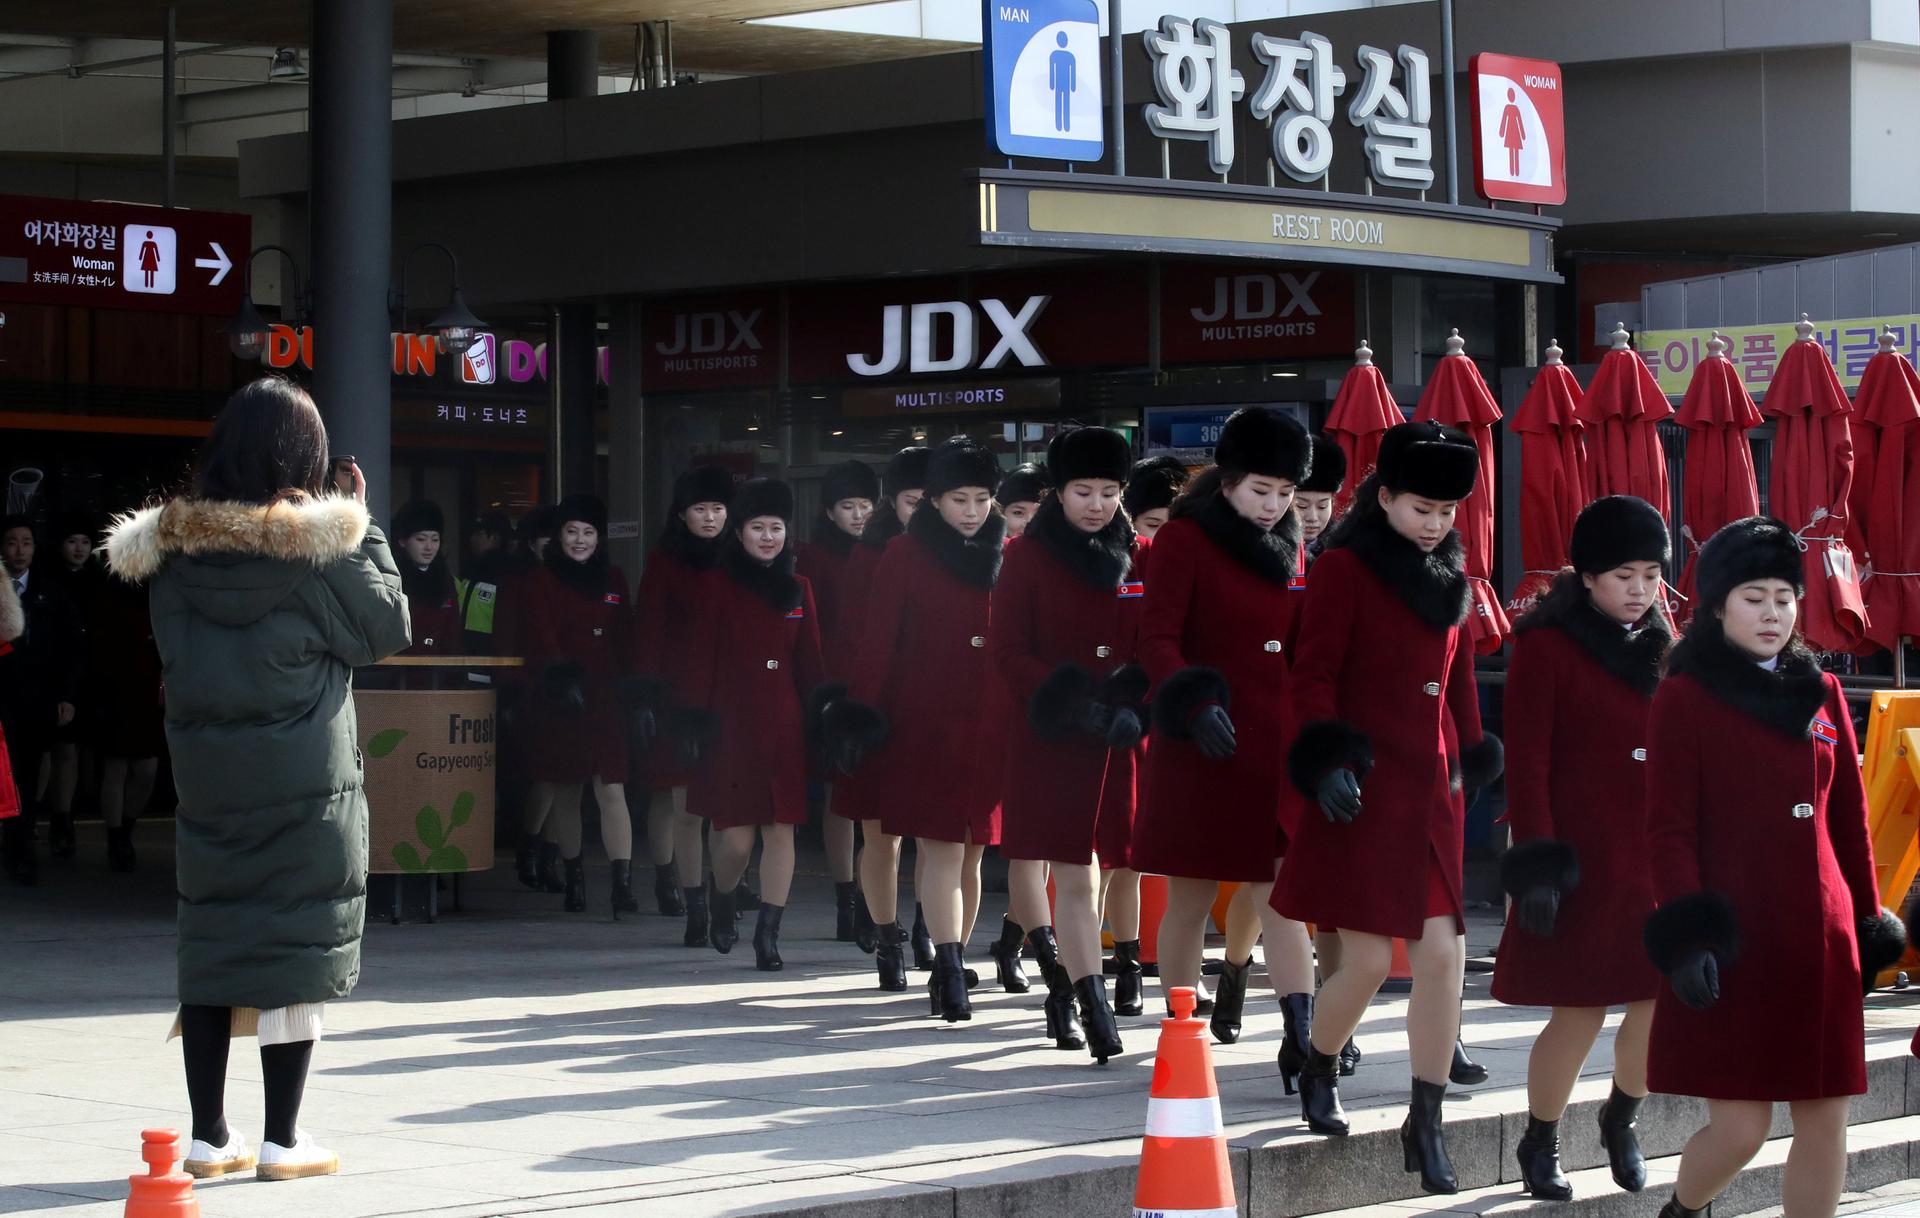 Members of North Korean cheering squad, dressed in red knee length jackets with black fur trim, walk at an expressway service area in Gapyeong, South Korea, Feb. 7, 2018.